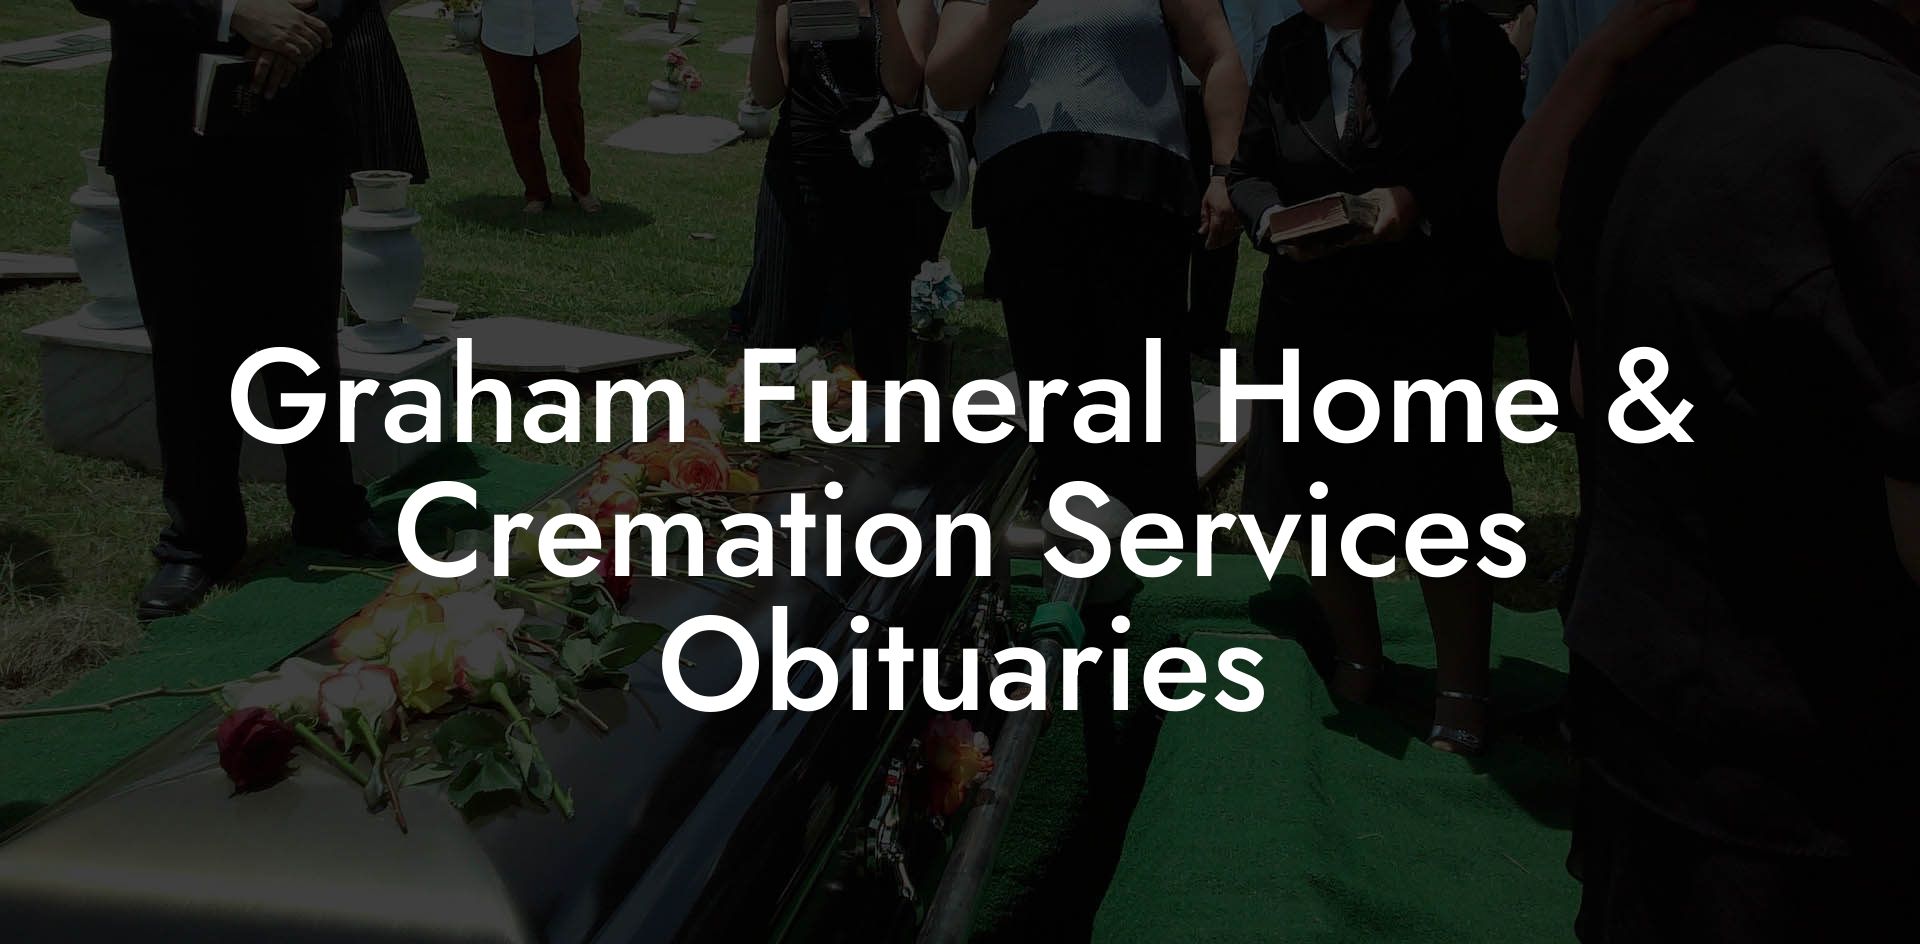 Graham Funeral Home & Cremation Services Obituaries